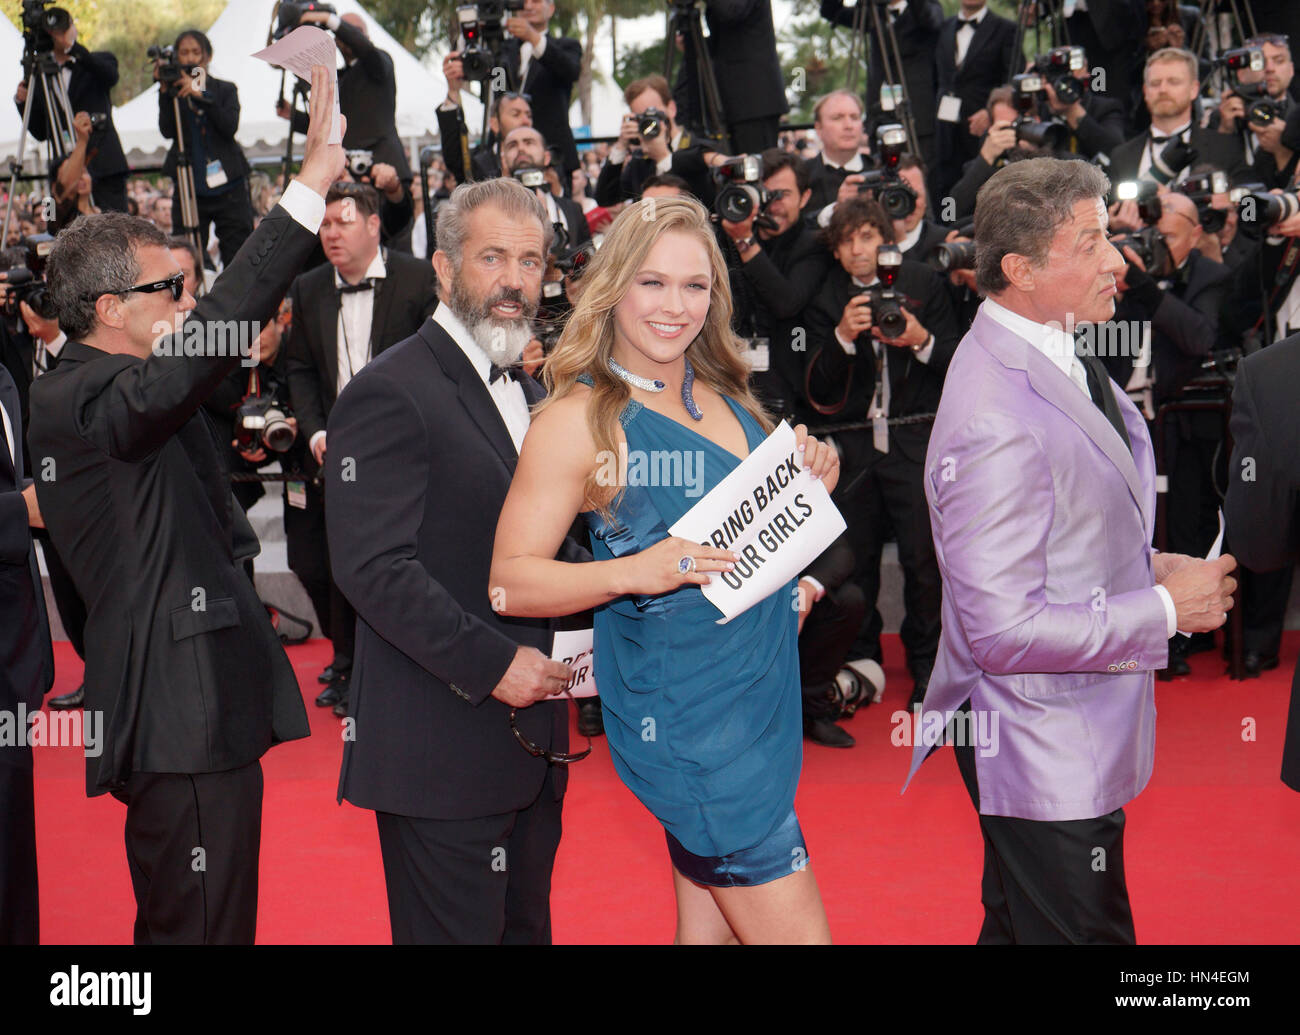 The cast of Expendables 3, Antonio Banderas, Mel Gibson, Ronda Rousey, and Sylvester Stallone, hold up Bring Back Our Girls signs  on the red carpet at the Cannes Film Festival on May 18, 2014, in Cannes, France.  Photo by Francis Specker Stock Photo